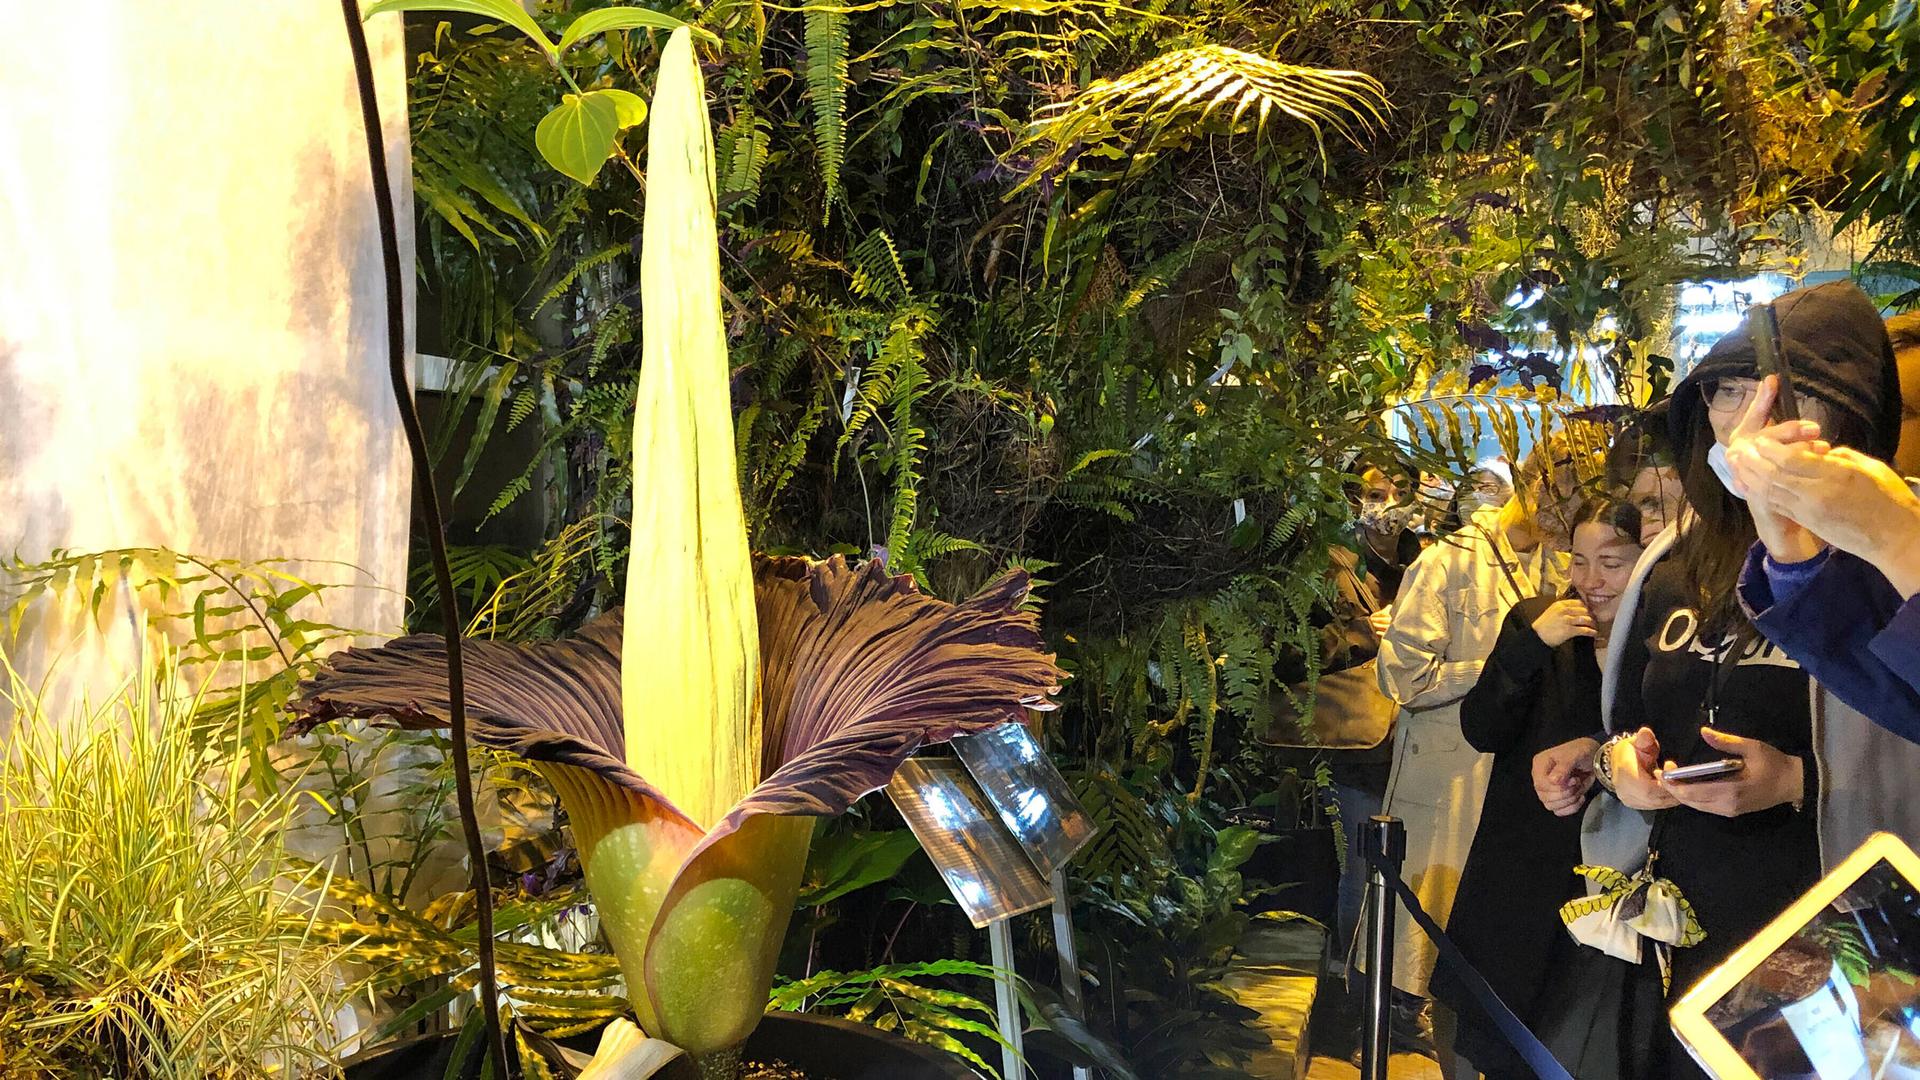 Several people are shown off to the side looking at the tall, yellow blooming of the Sumatran Titan arum flower.